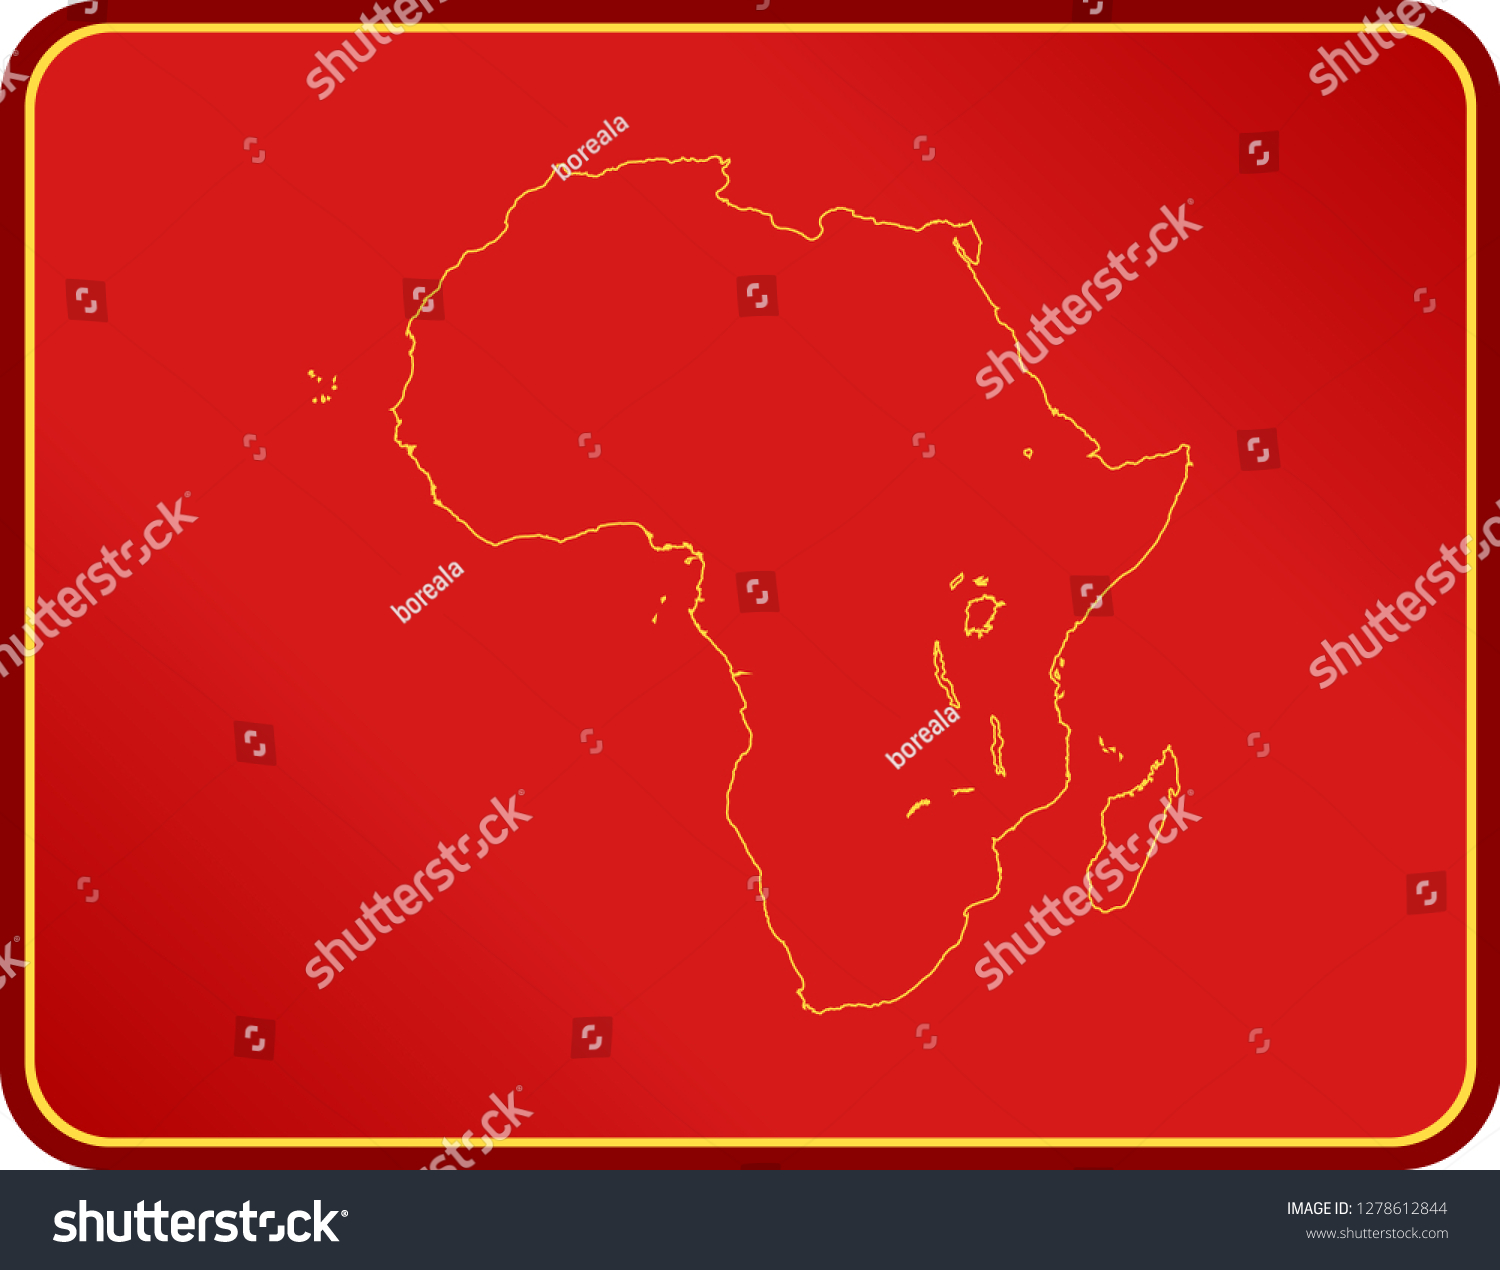 Map Of Africa Royalty Free Stock Vector 1278612844 7290